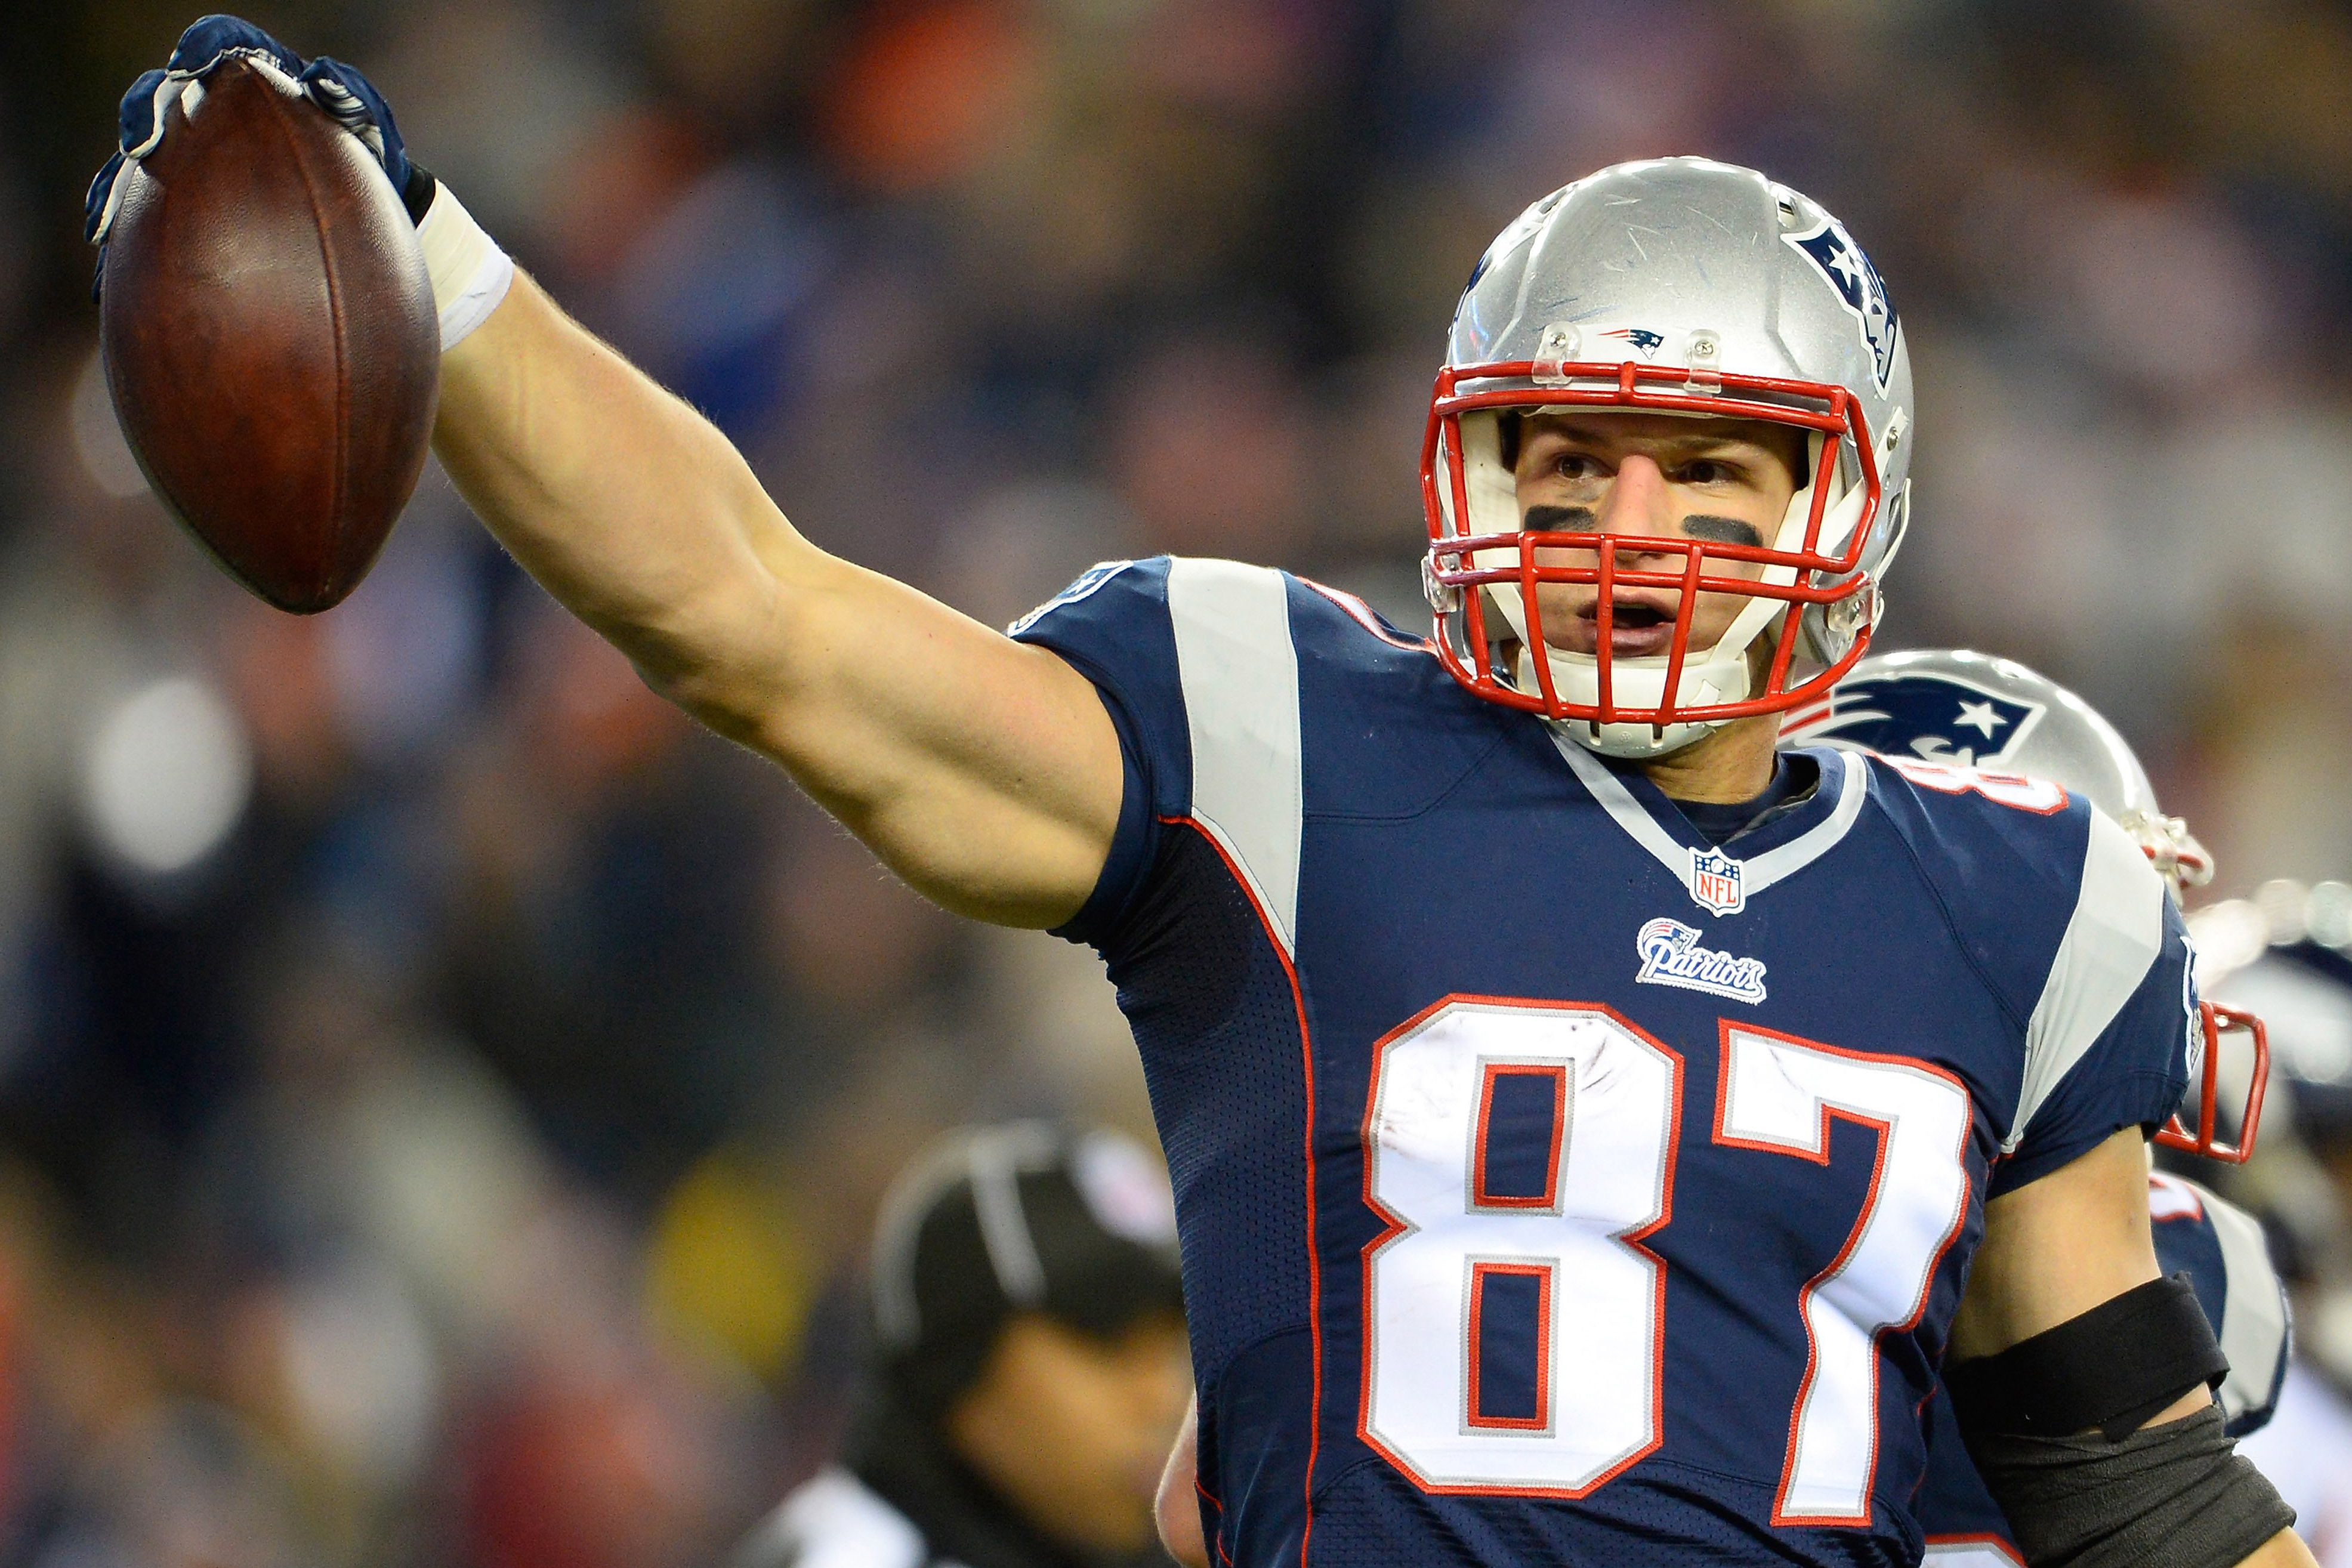 Rob Gronkowski at full strength is a legit MVP candidate. New